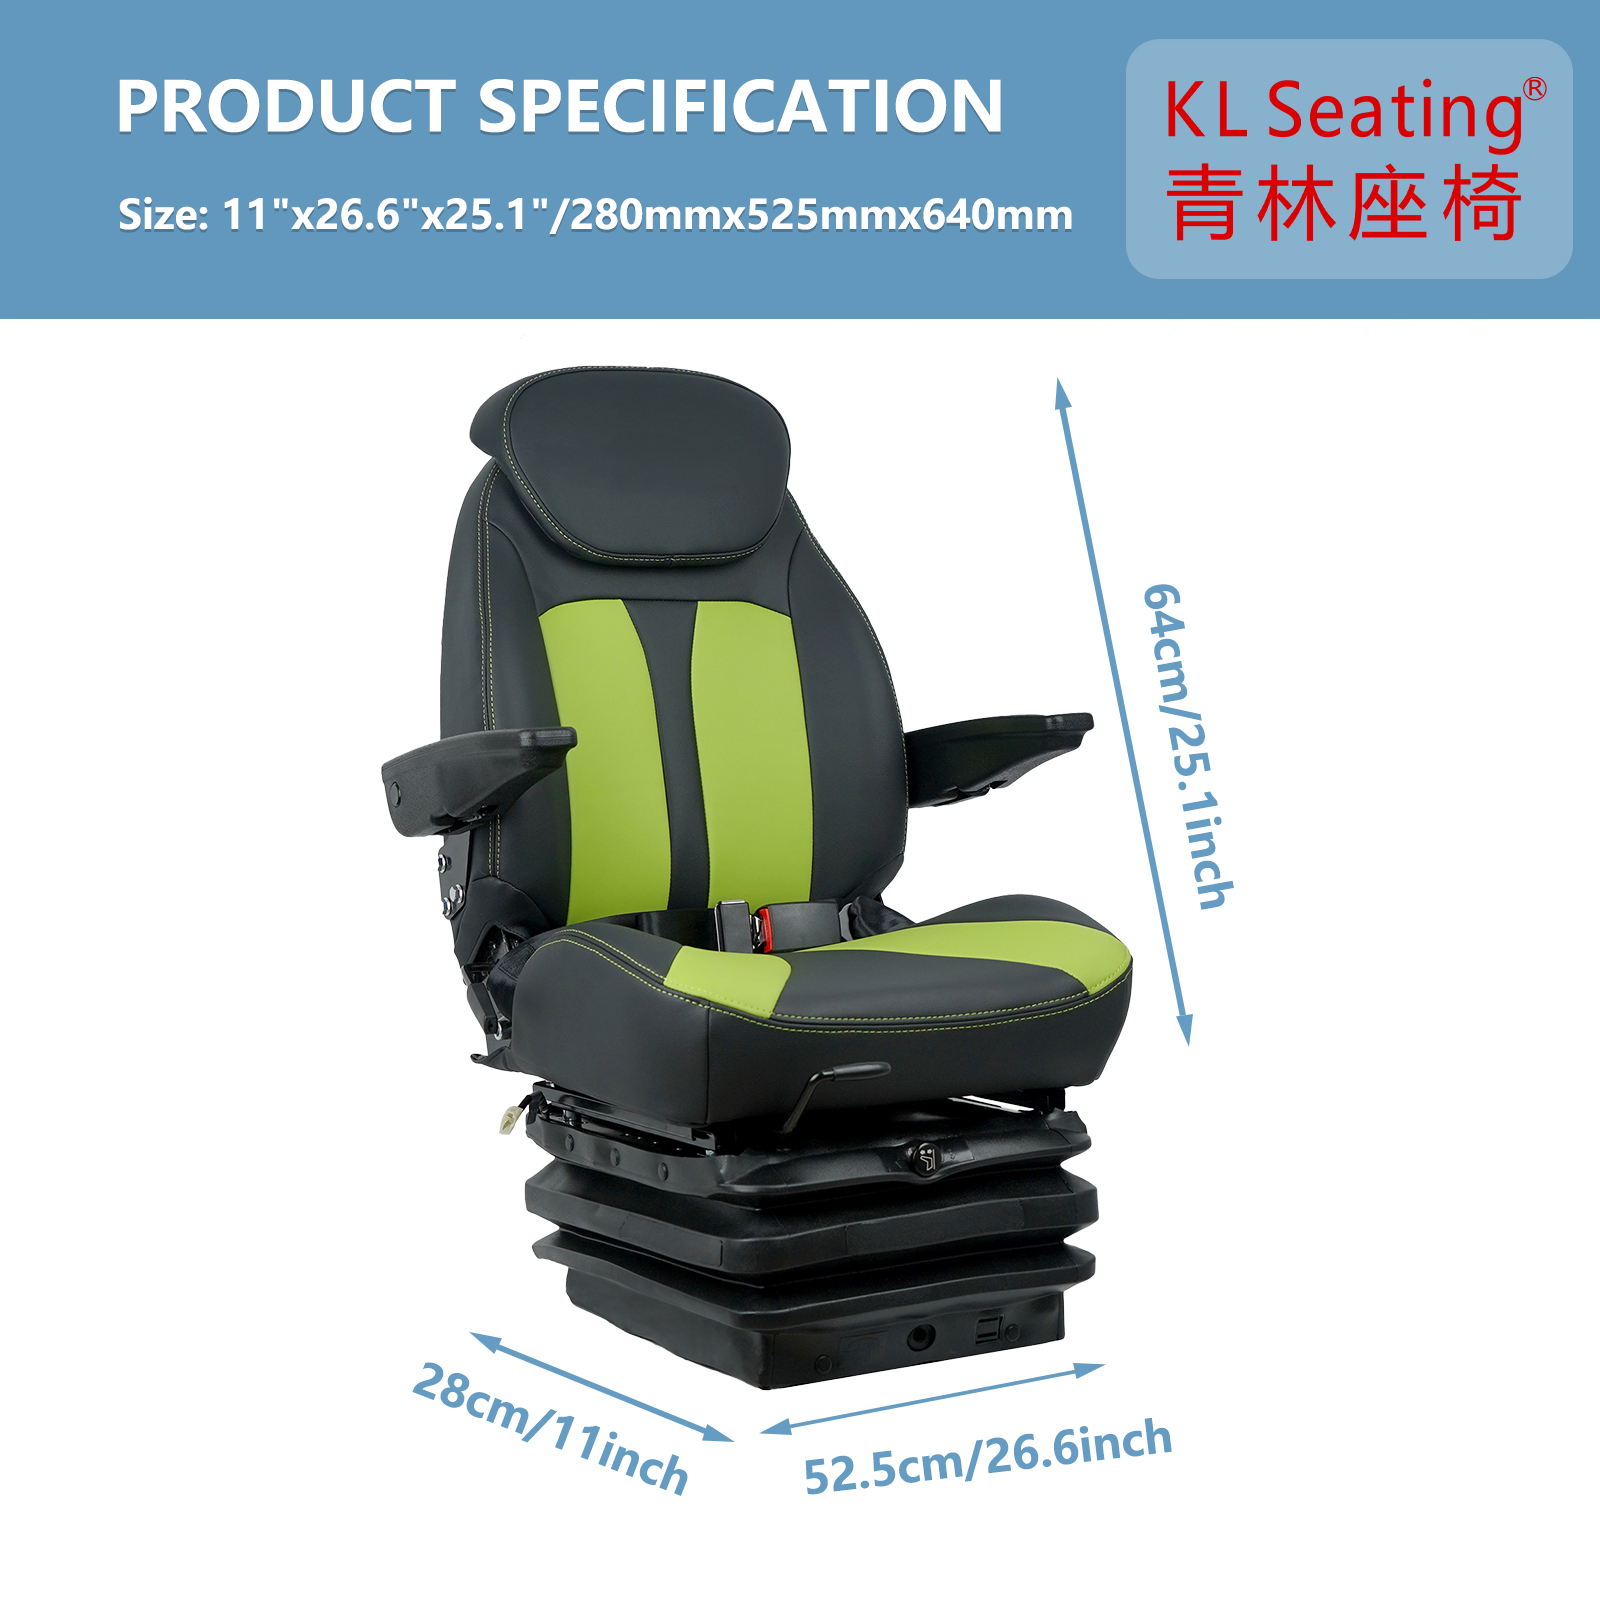 Shop for Forklift Seats: Quality and Durability Guaranteed